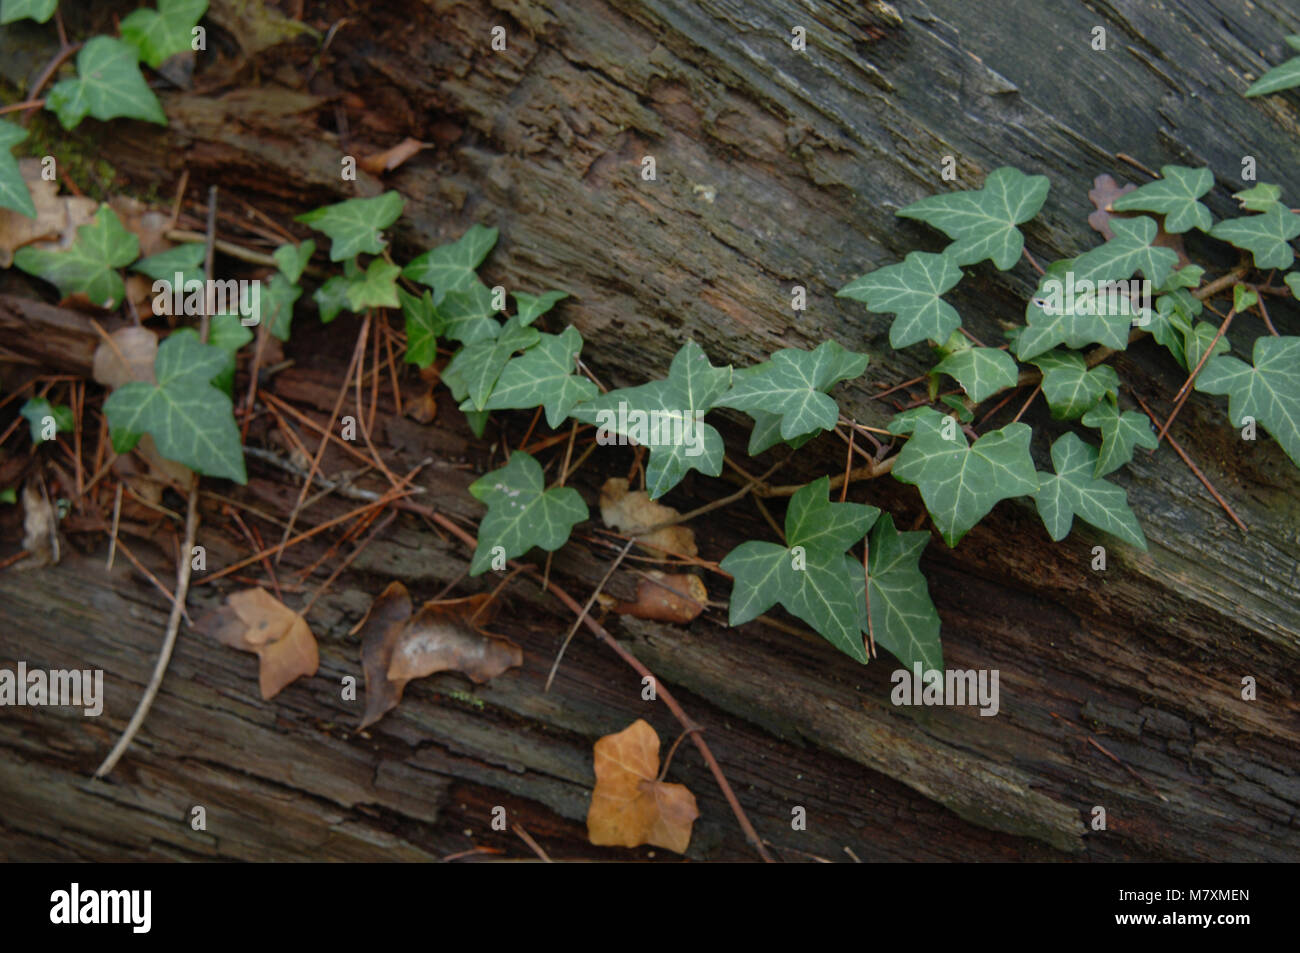 The forest floor, fallen trees, decaying wood, dead leaves and ivy. Stock Photo